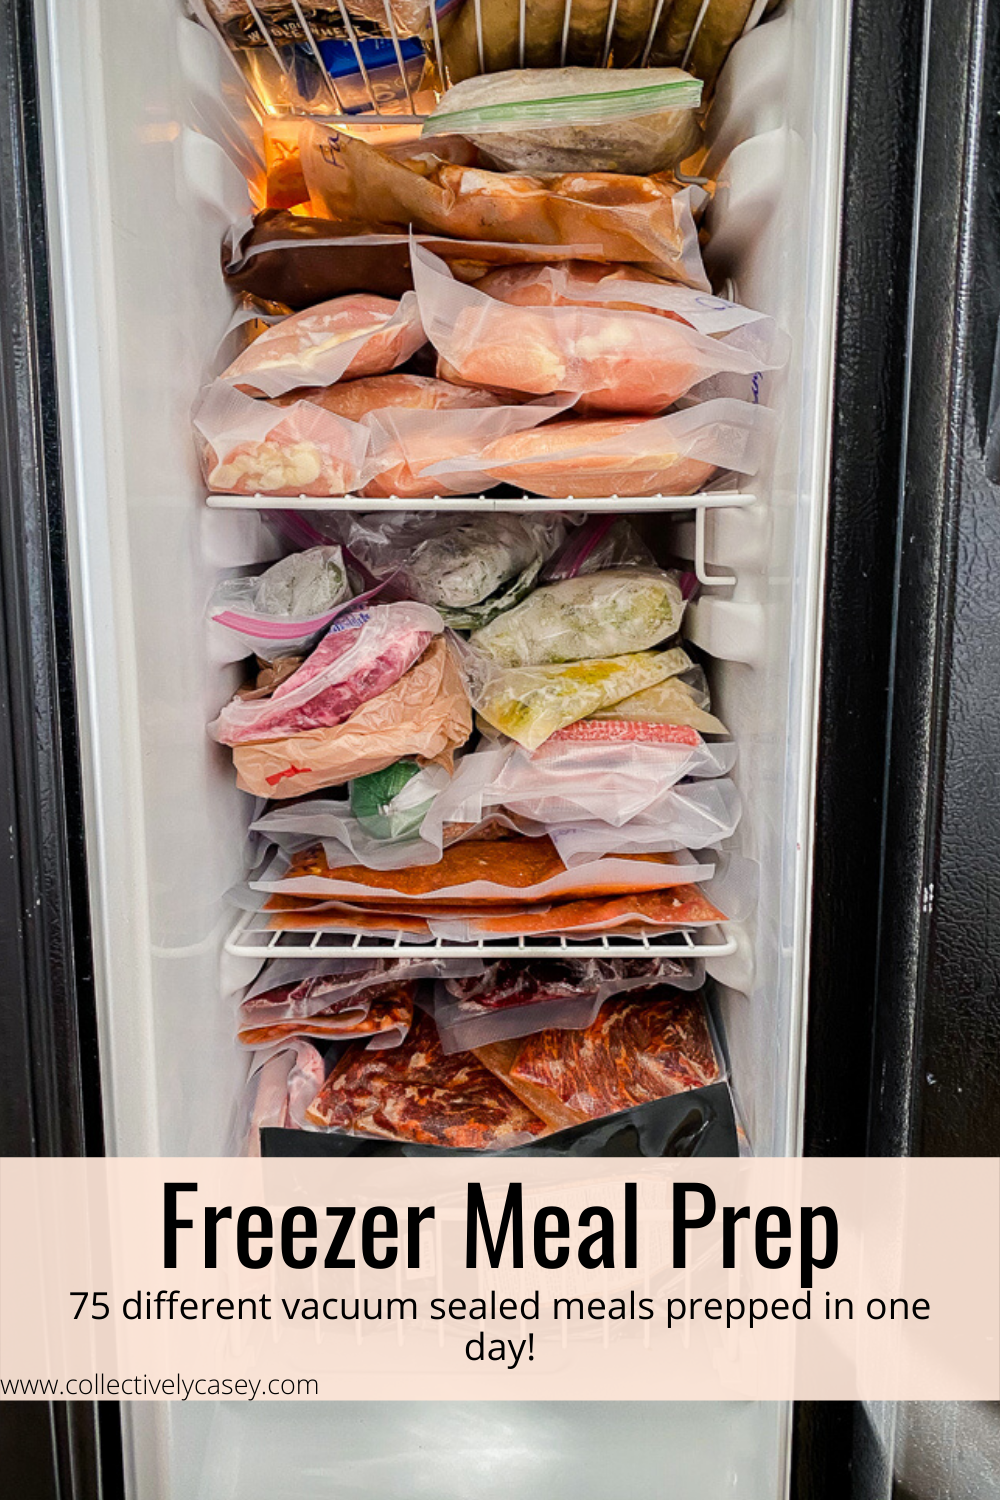 https://collectivelycasey.com/wp-content/uploads/2020/05/freezer-meals.png